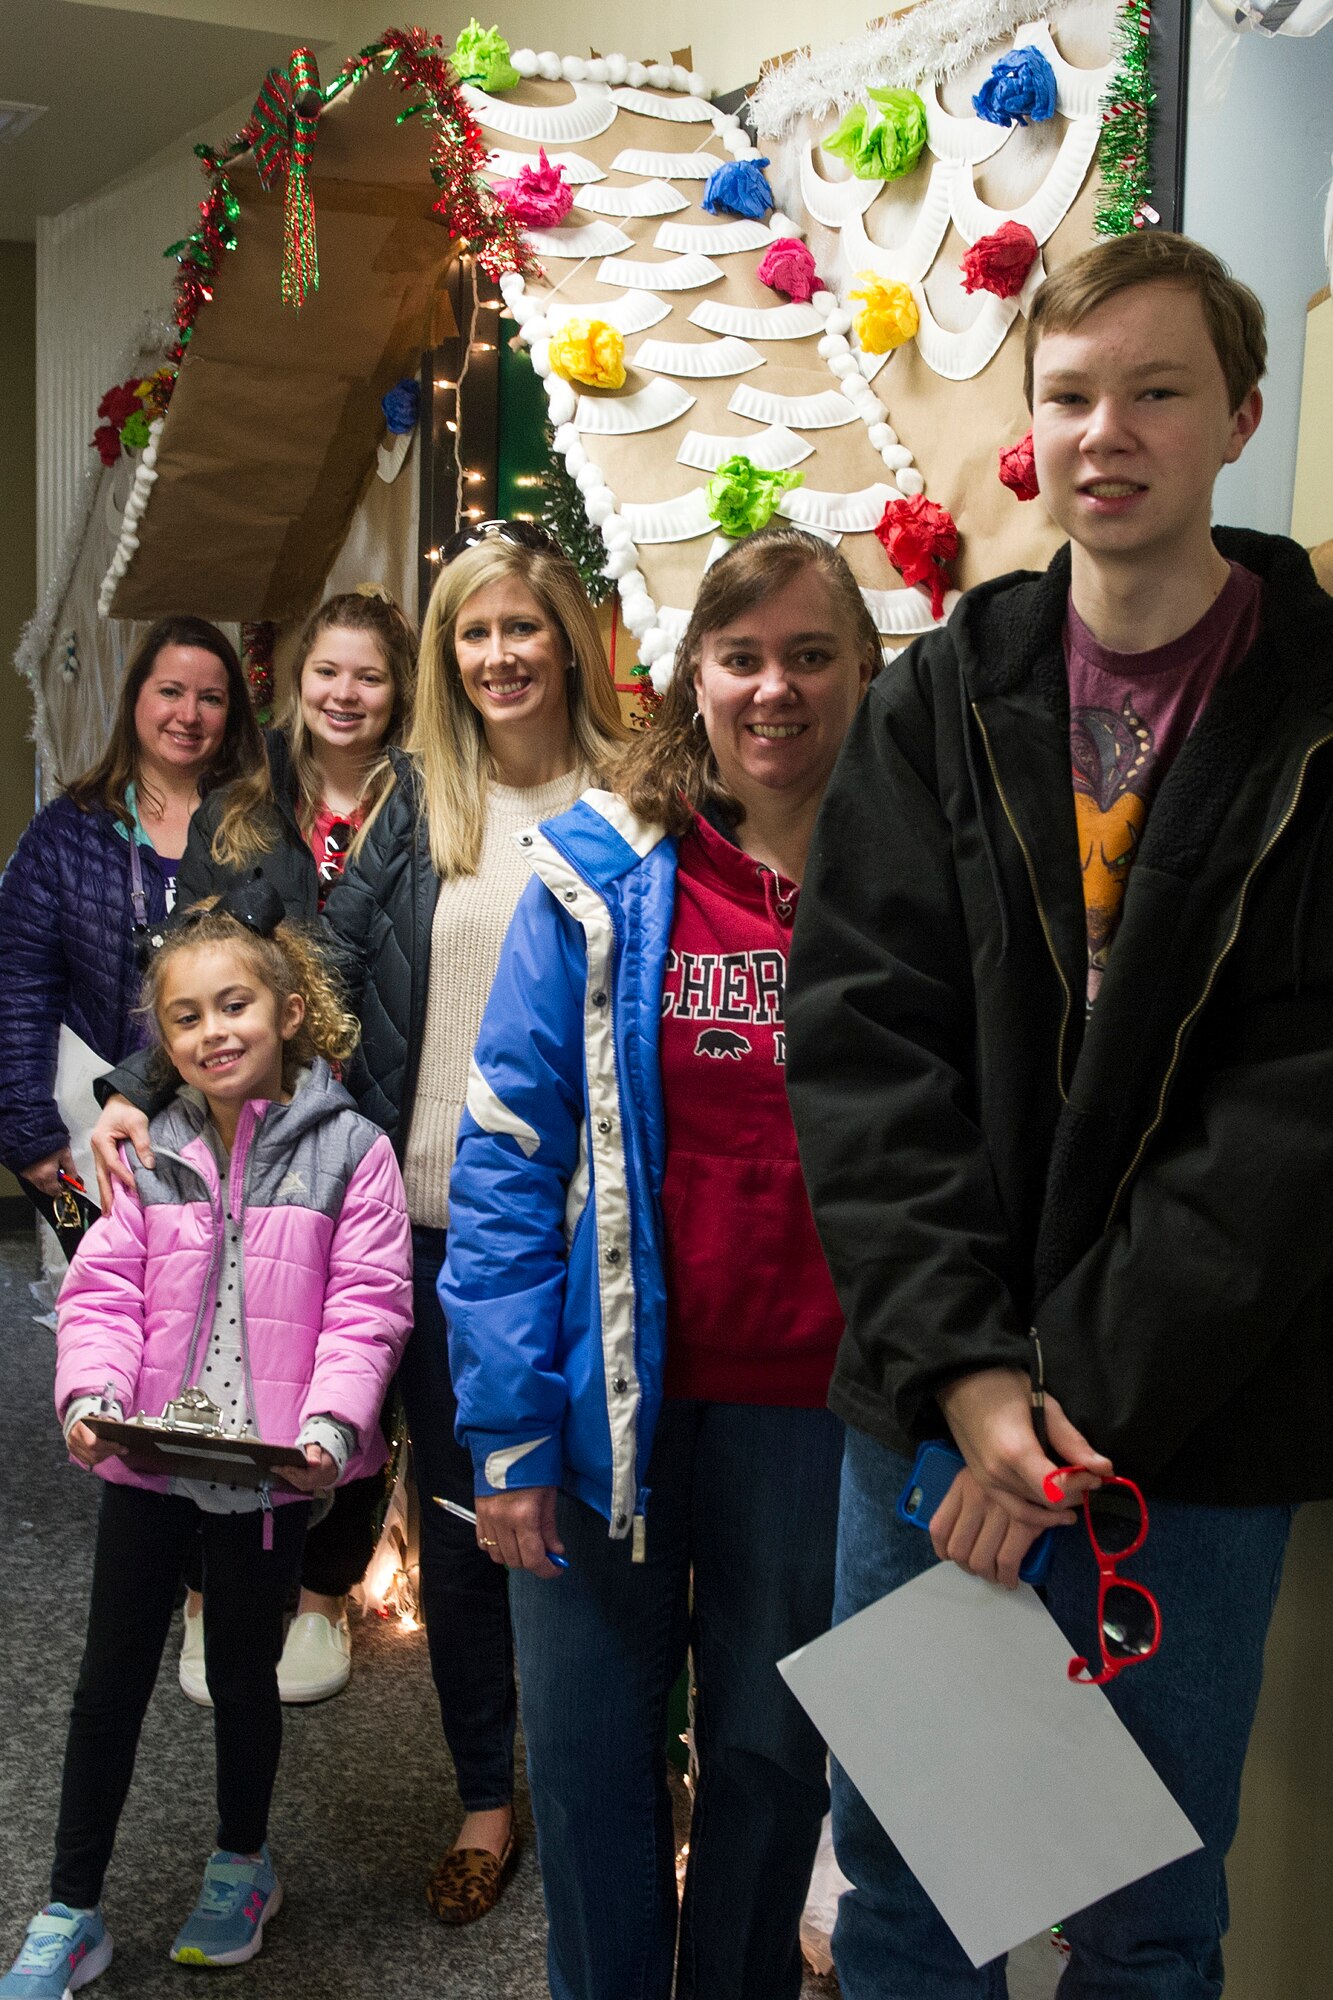 Members of Grissom’s Key Spouse program, and their children, pose for a picture under the gingerbread house constructed at the base finance office at Grissom Air Reserve Base, Ind., Dec. 8, 2019. Military and civilian personnel throughout the base decorated their office doors as part of a holiday-themed contest.
(U.S. Air Force photo/Staff Sgt. Courtney Dotson-Essett)